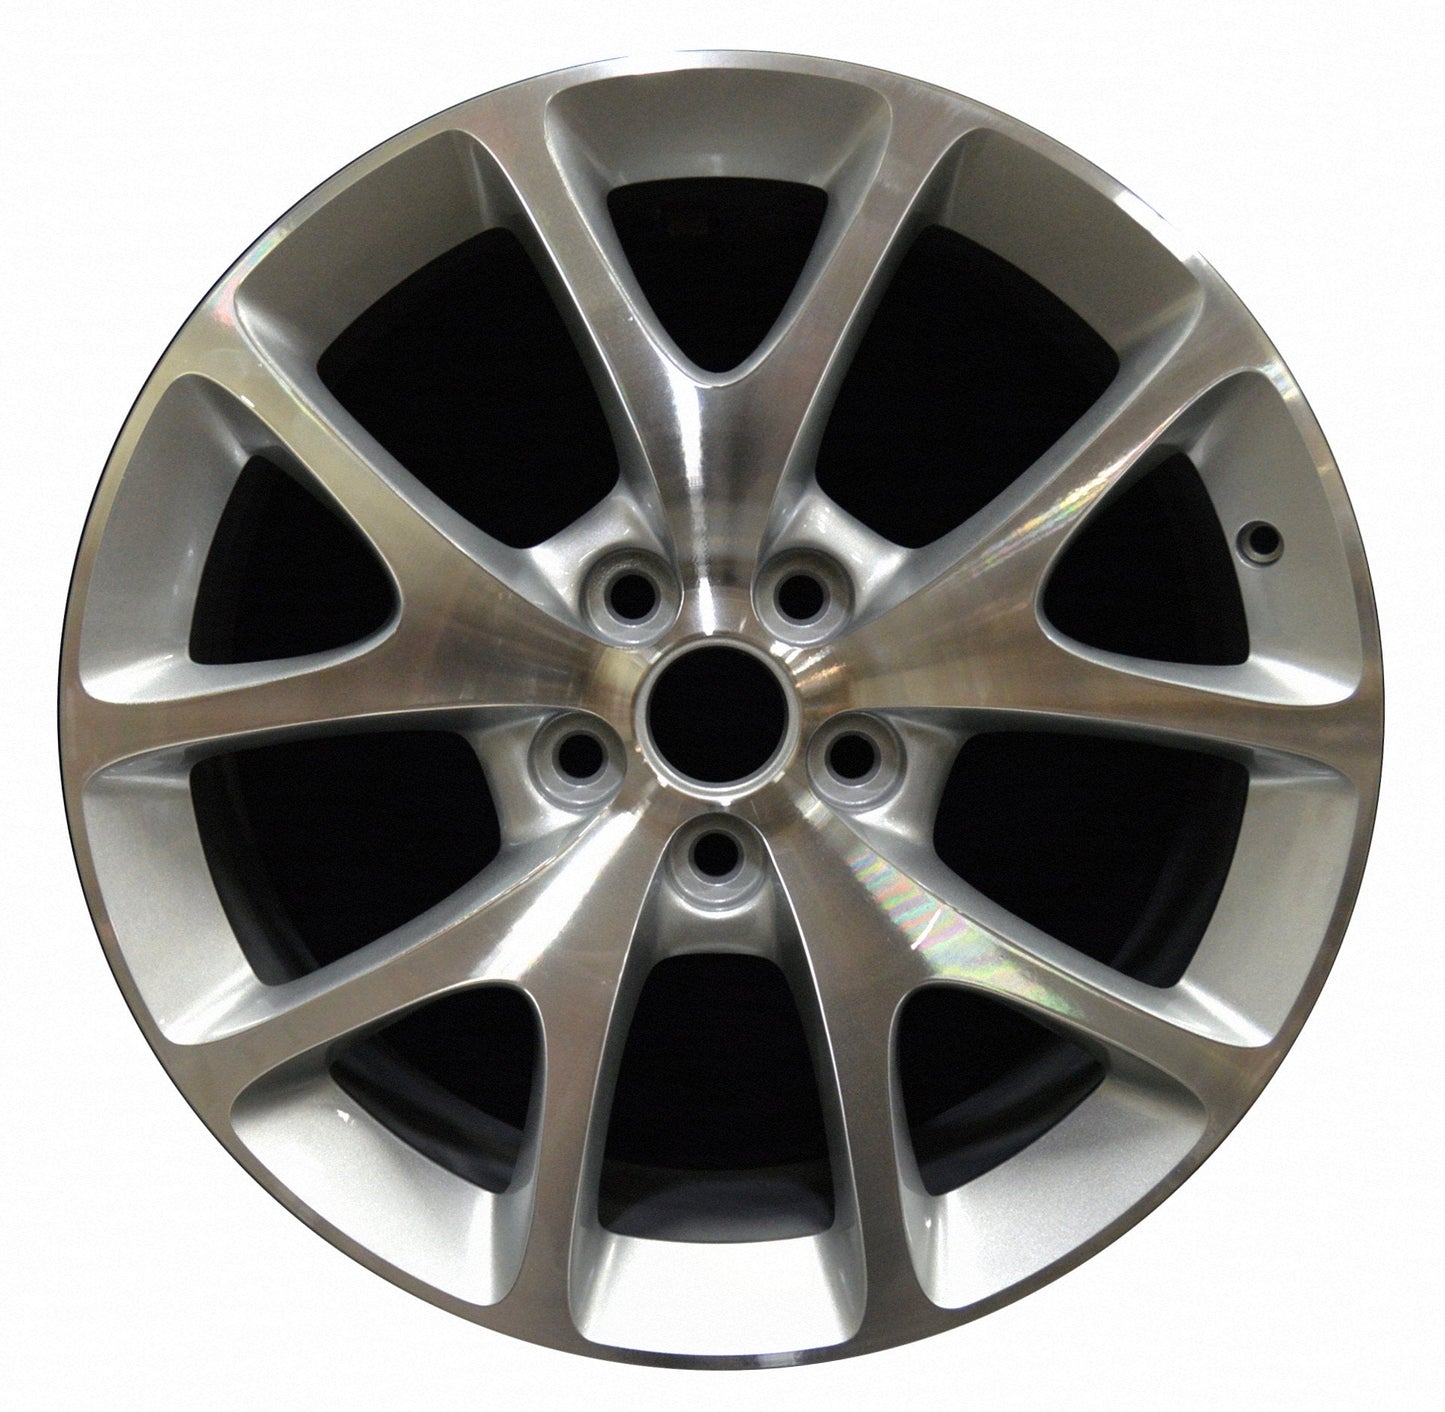 Buick Lacrosse  2012, 2013 Factory OEM Car Wheel Size 19x8.5 Alloy WAO.4108.PS09.MABRT